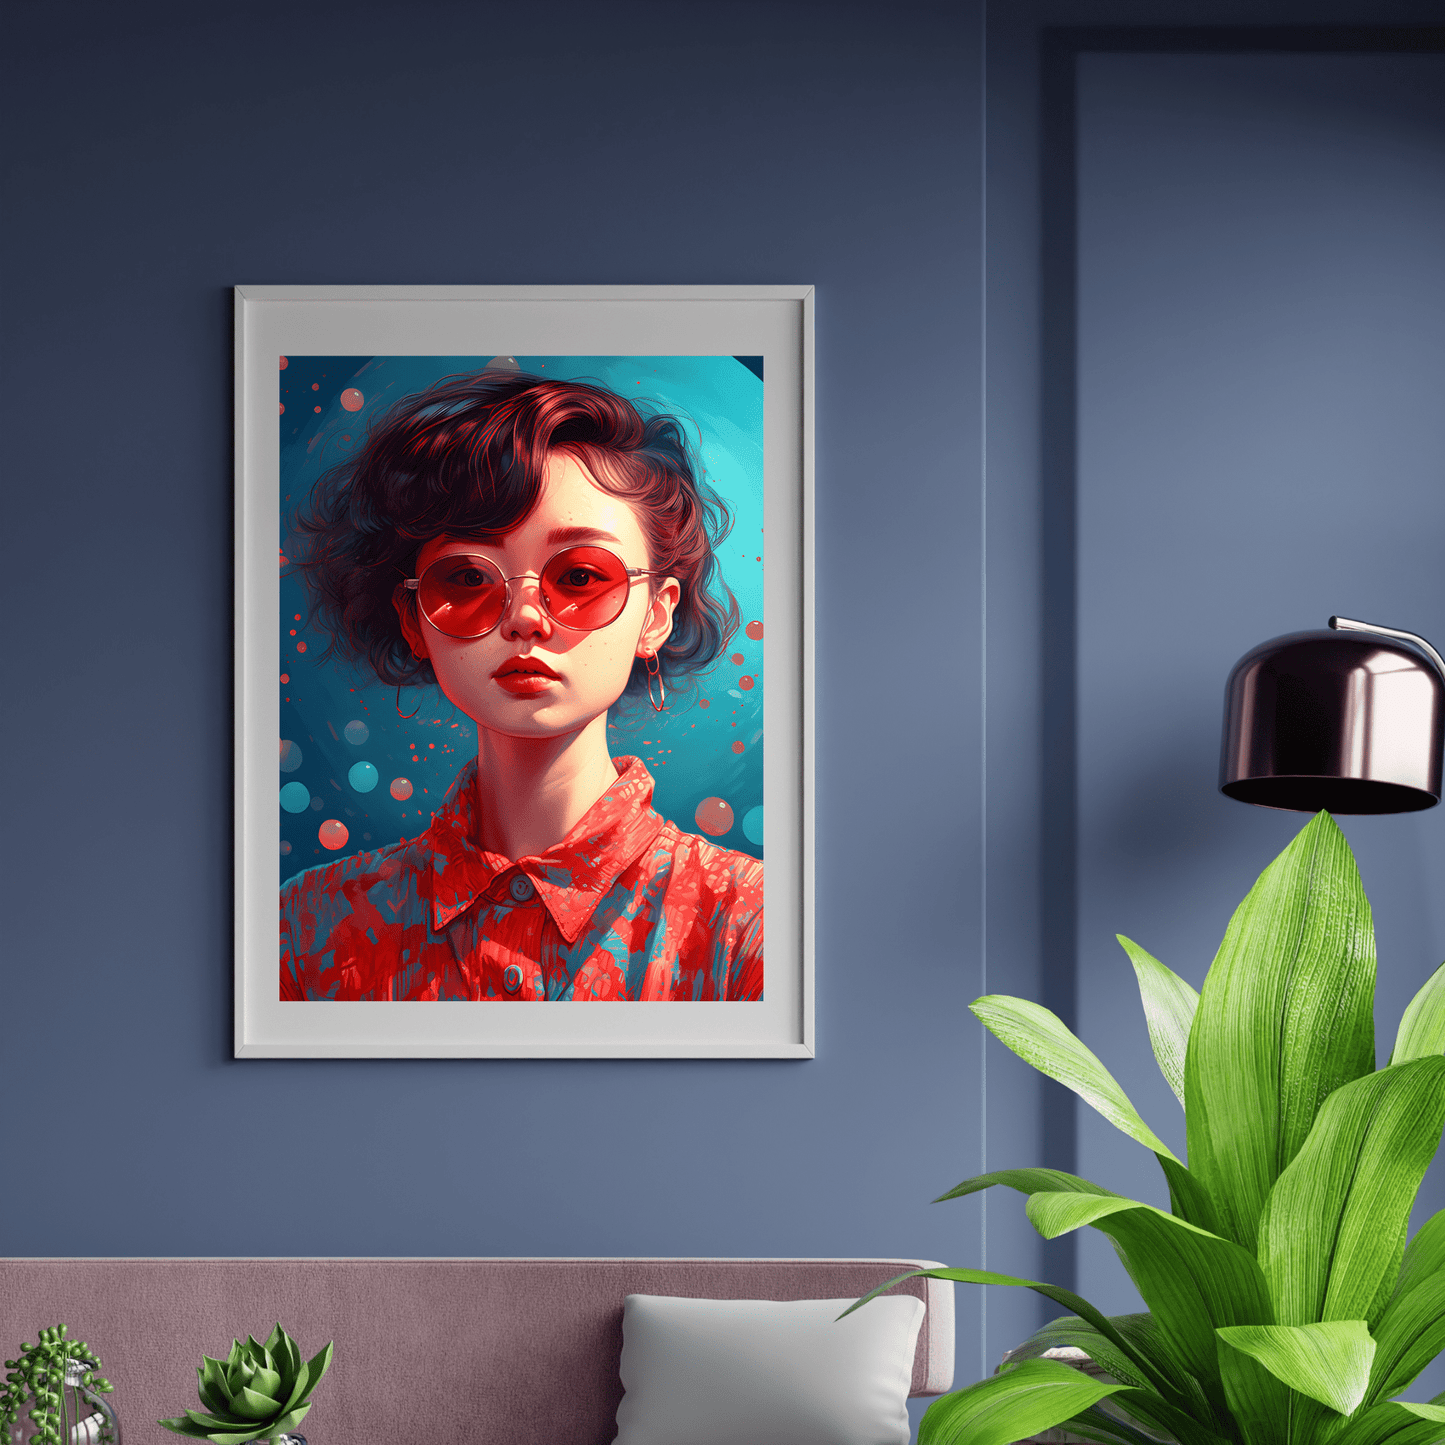 poster of a woman face in vibrant teal and red color printed and framed in a white frame, hanging on a wall